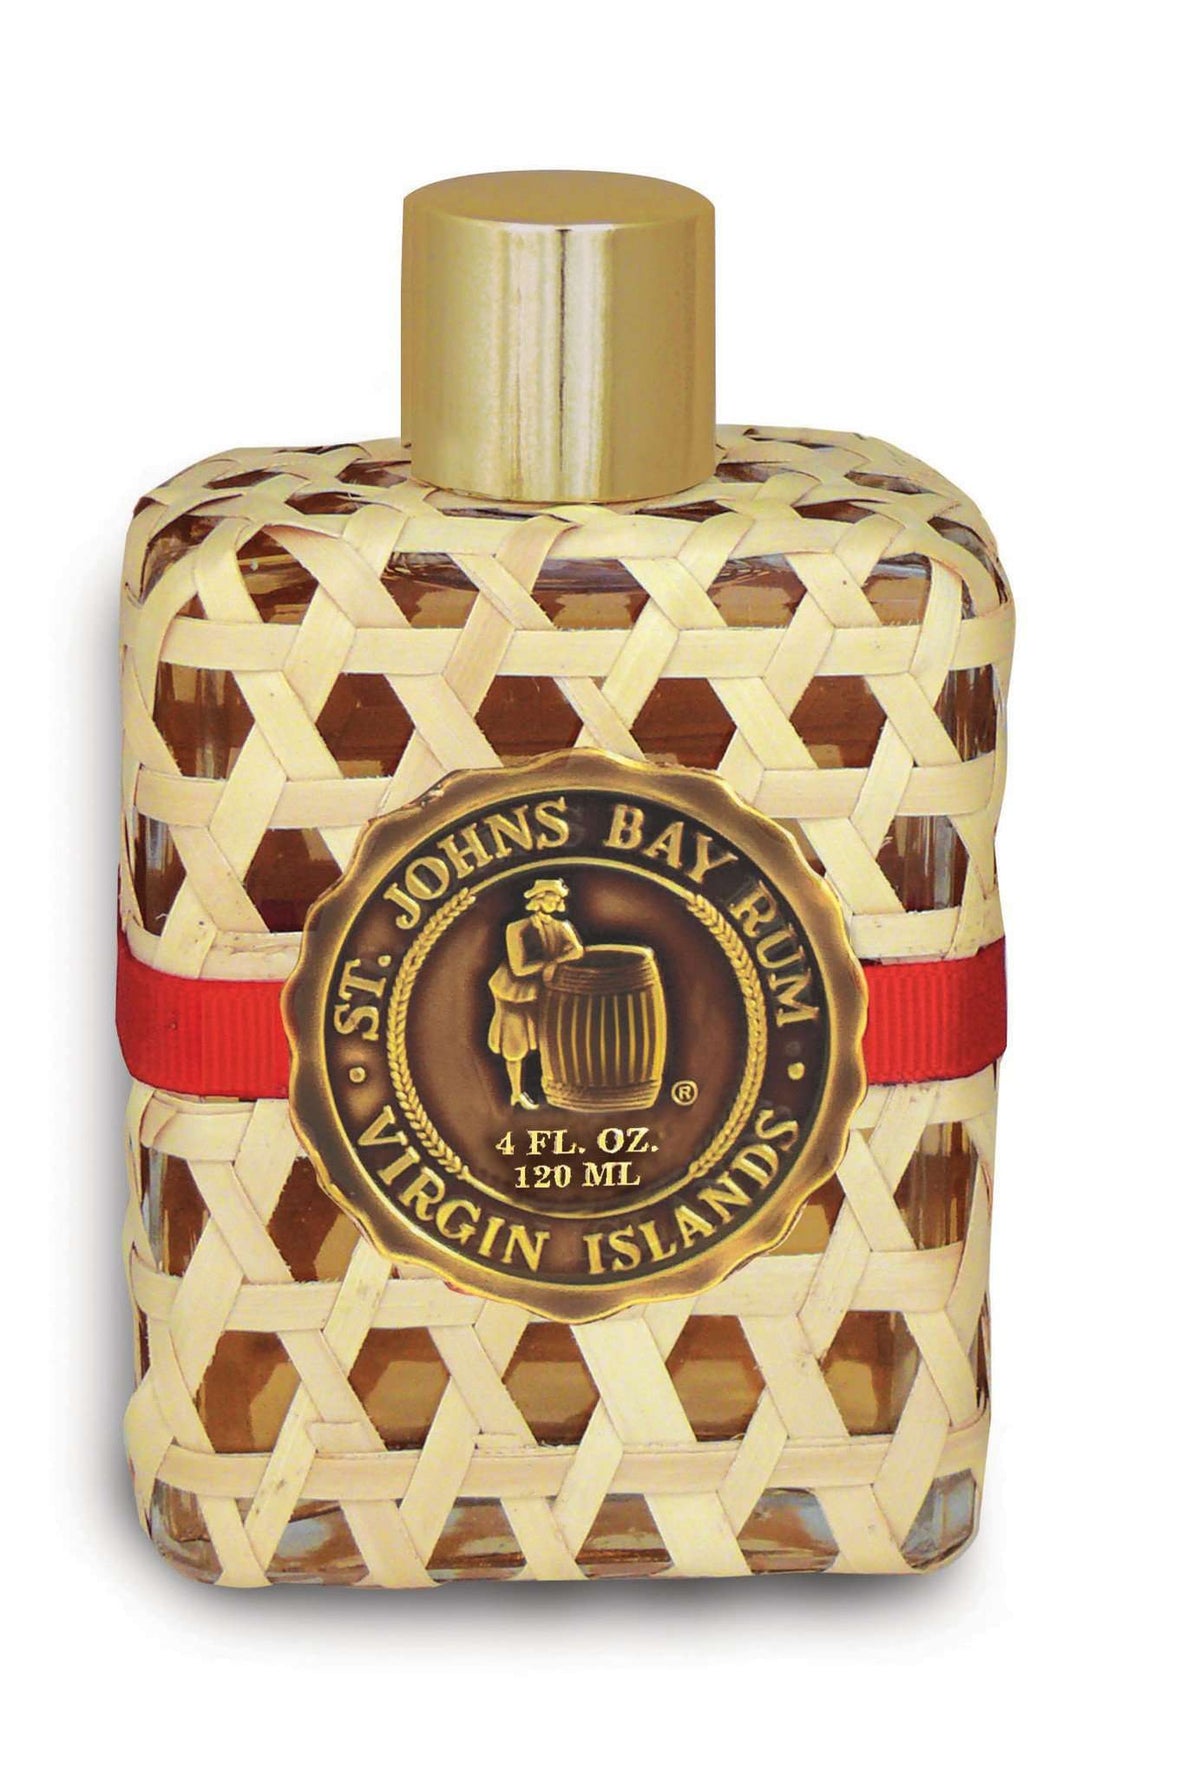 St. John's Bay Rum Cologne by West Indies Bay Company - Country Club Prep